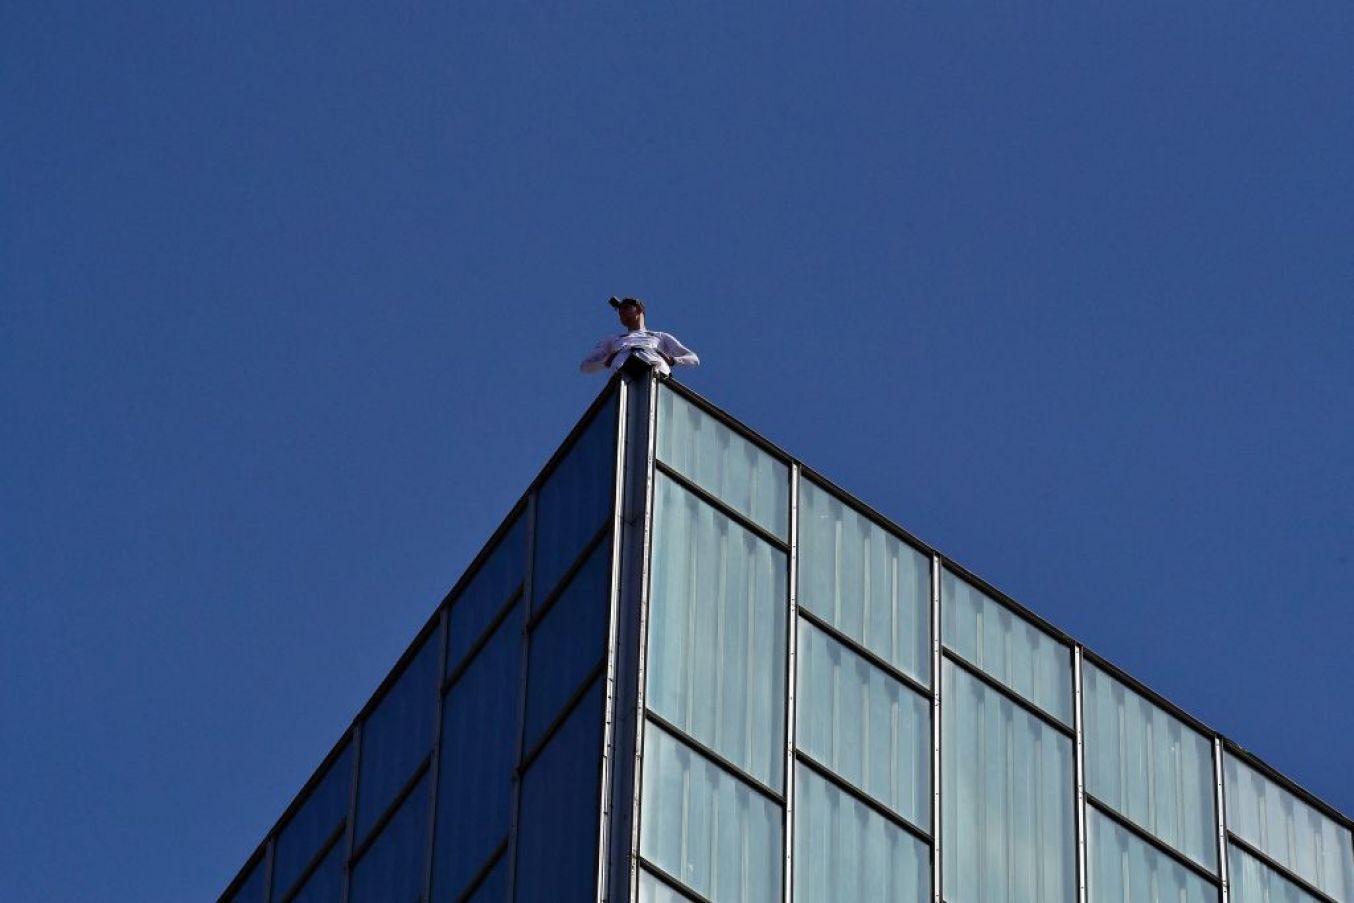 George King Observes The View After Free-Climbing The Building. Photo: Pau Barrena/Afp Via Getty Images